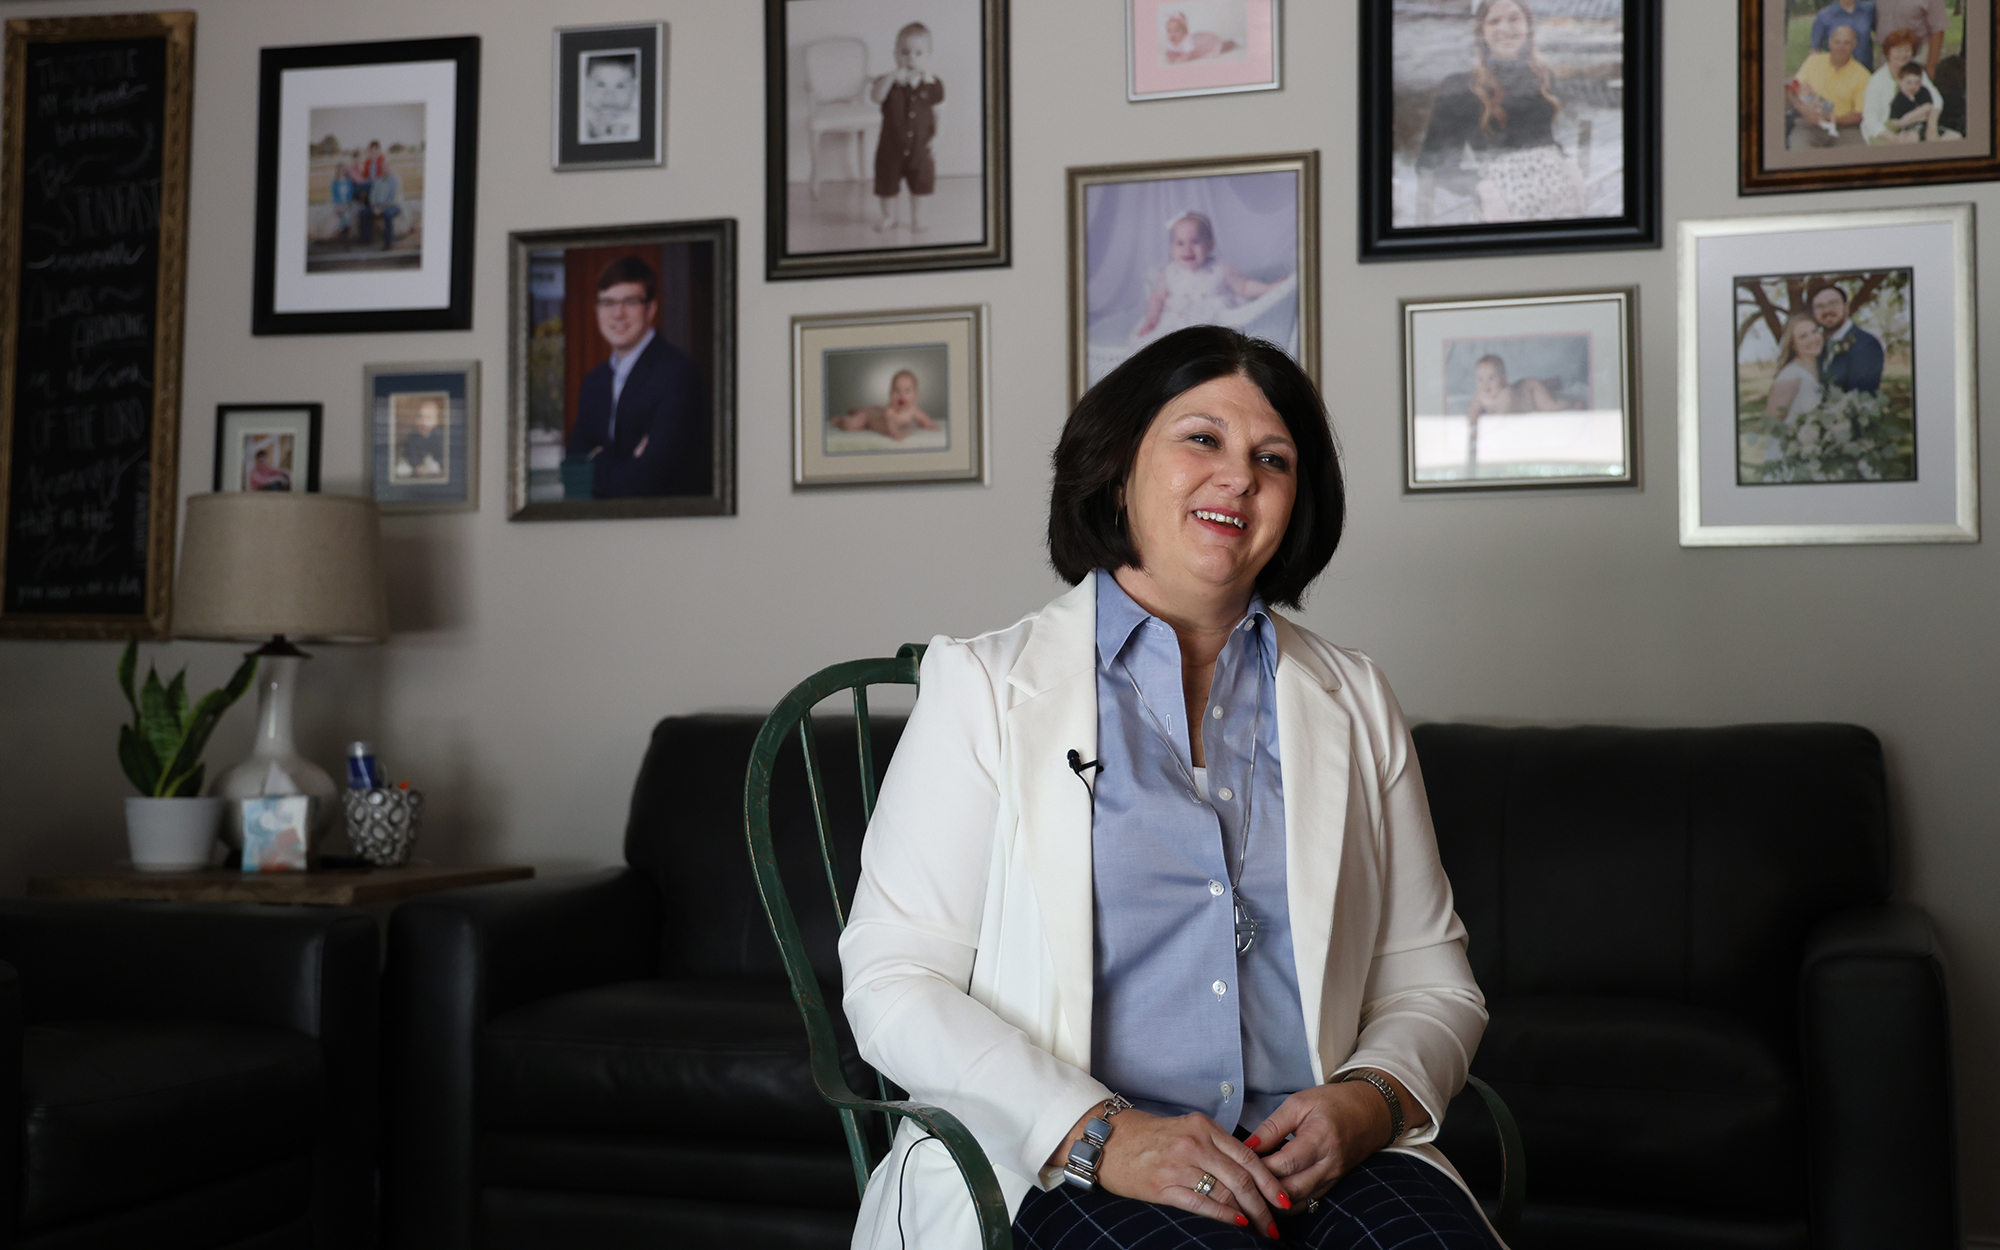 Lori Bova, an anti-abortion activist, sits in her living room against a backdrop of family photos in Hobbs, New Mexico, on June 25, 2023. Bova has been instrumental in the effort to get some New Mexico towns to pass local ordinances against abortion. (Photo by Cassidey Kavathas/News21)